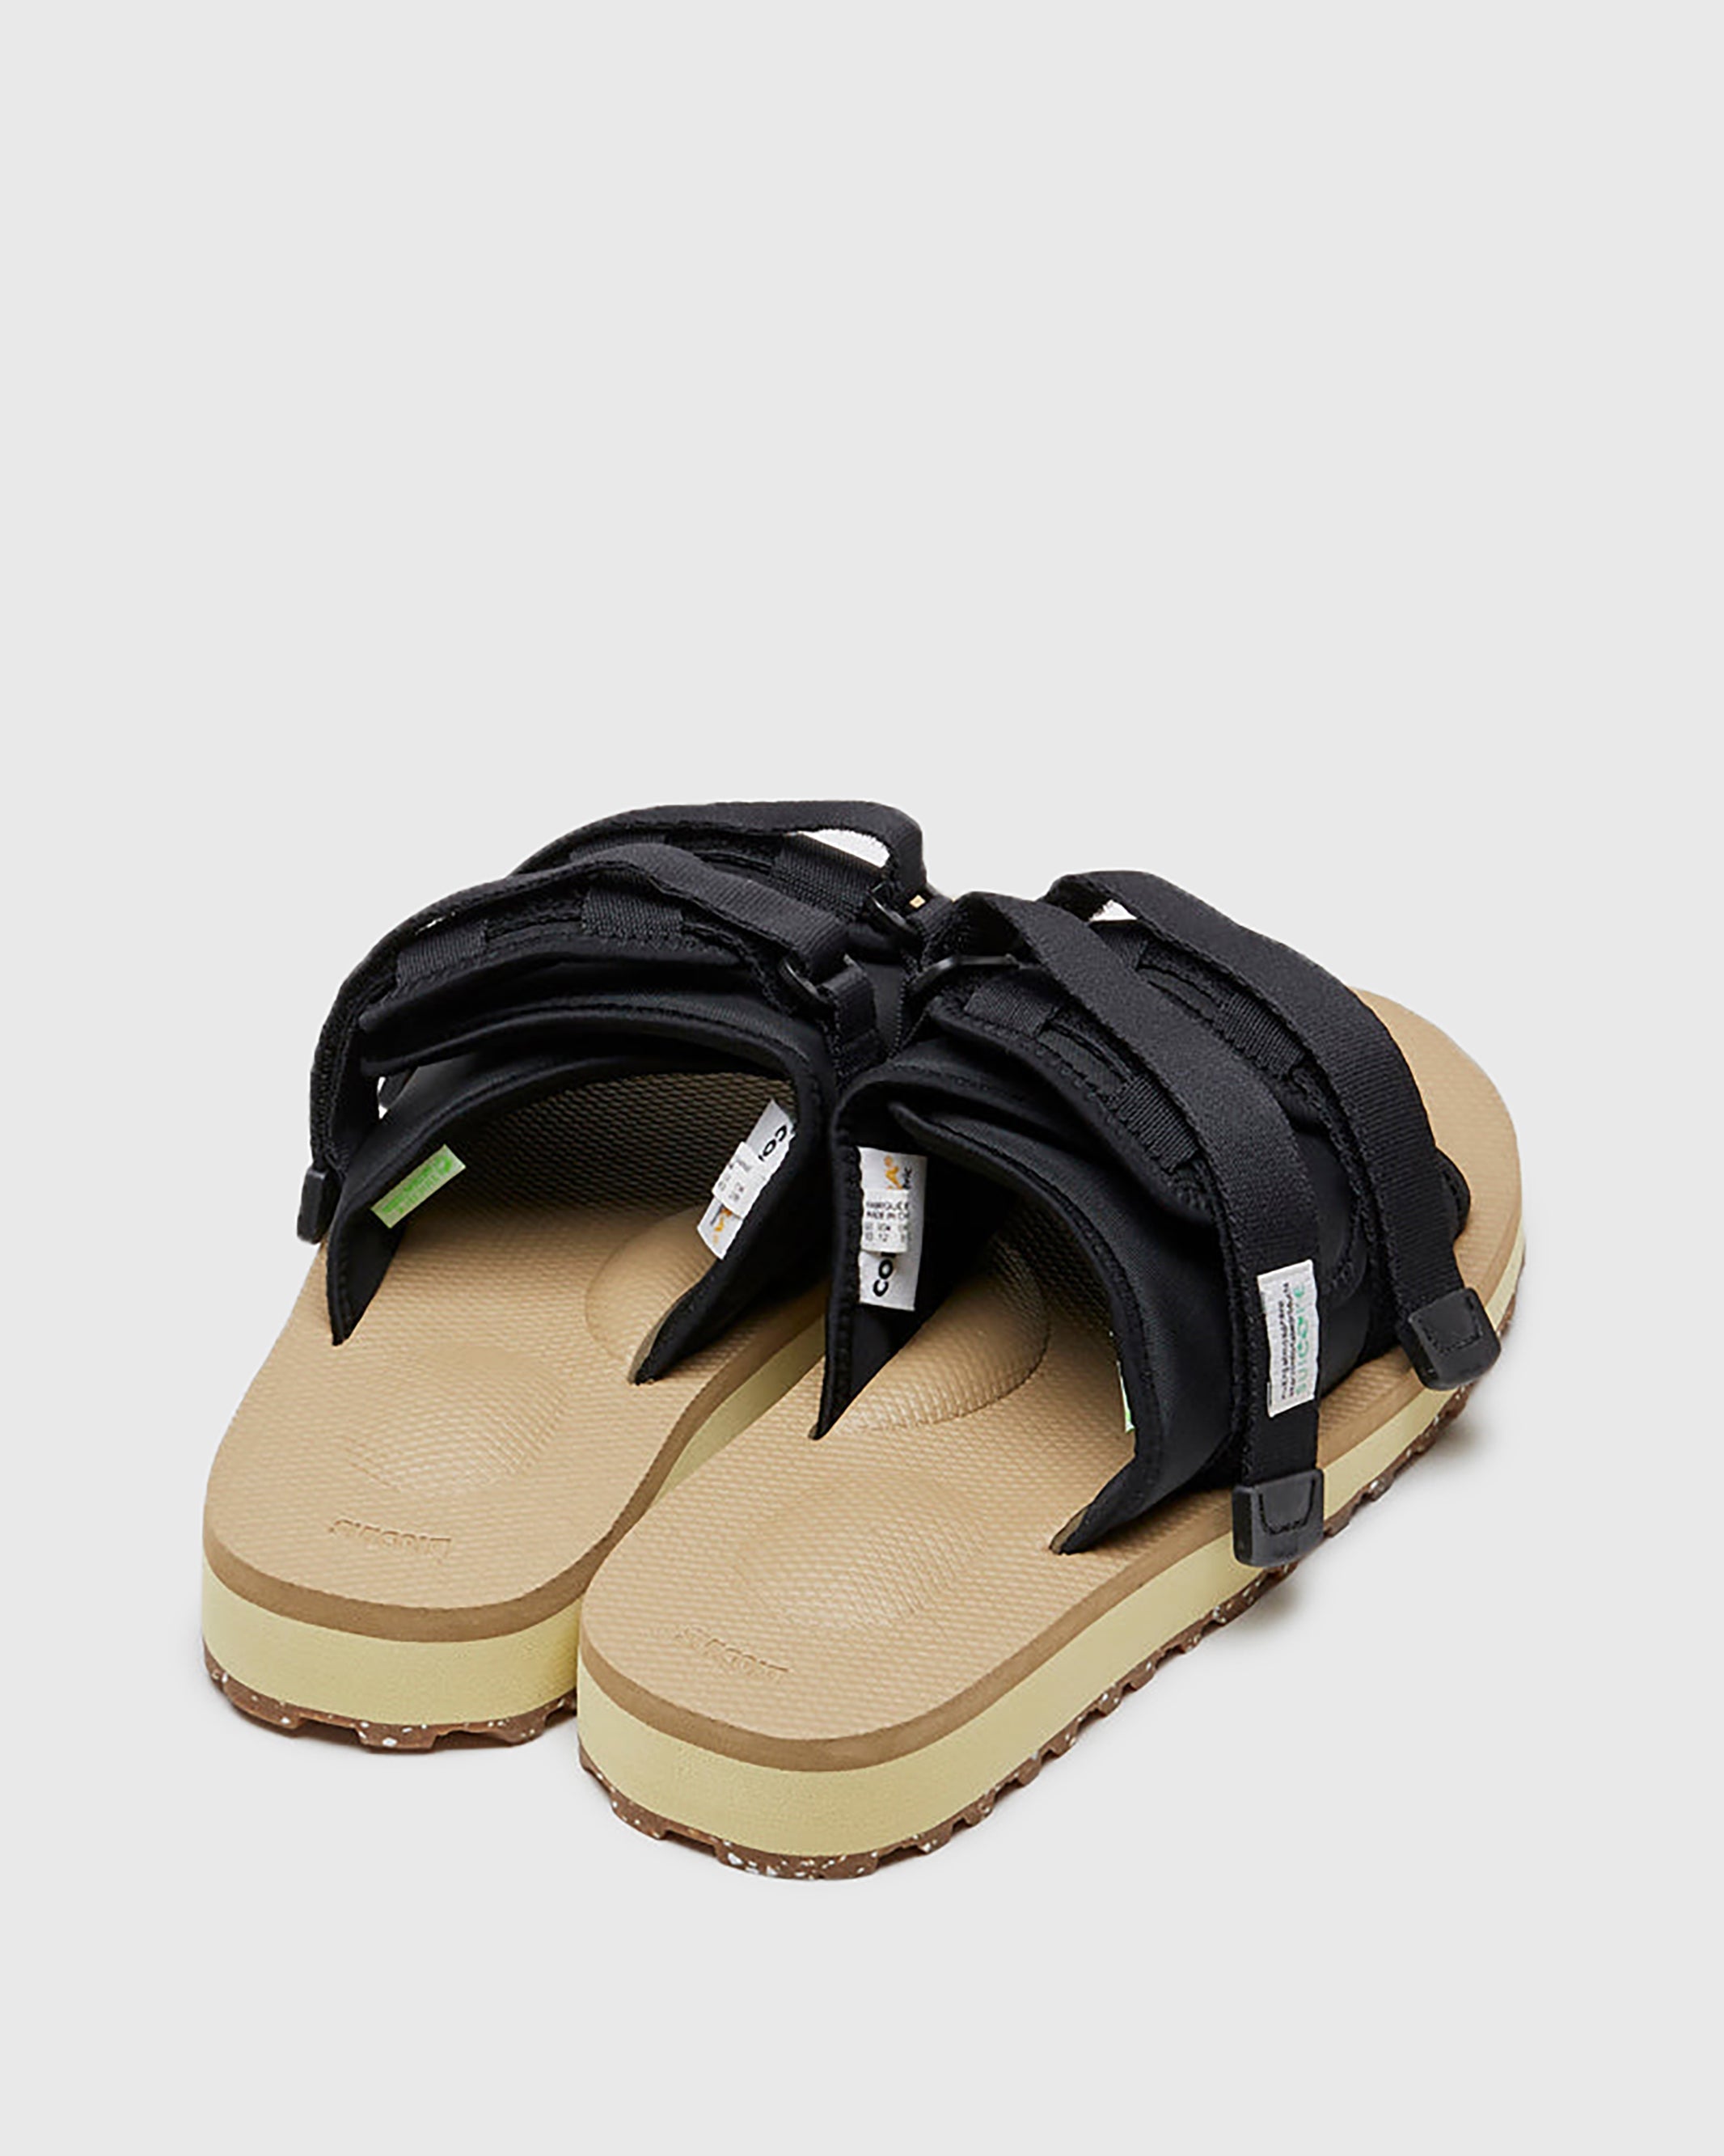 SUICOKE MOTO-Cab-ECO in Black X Beige OG-056CAB-ECO | Shop from eightywingold an official brand partner for SUICOKE Canada and US.